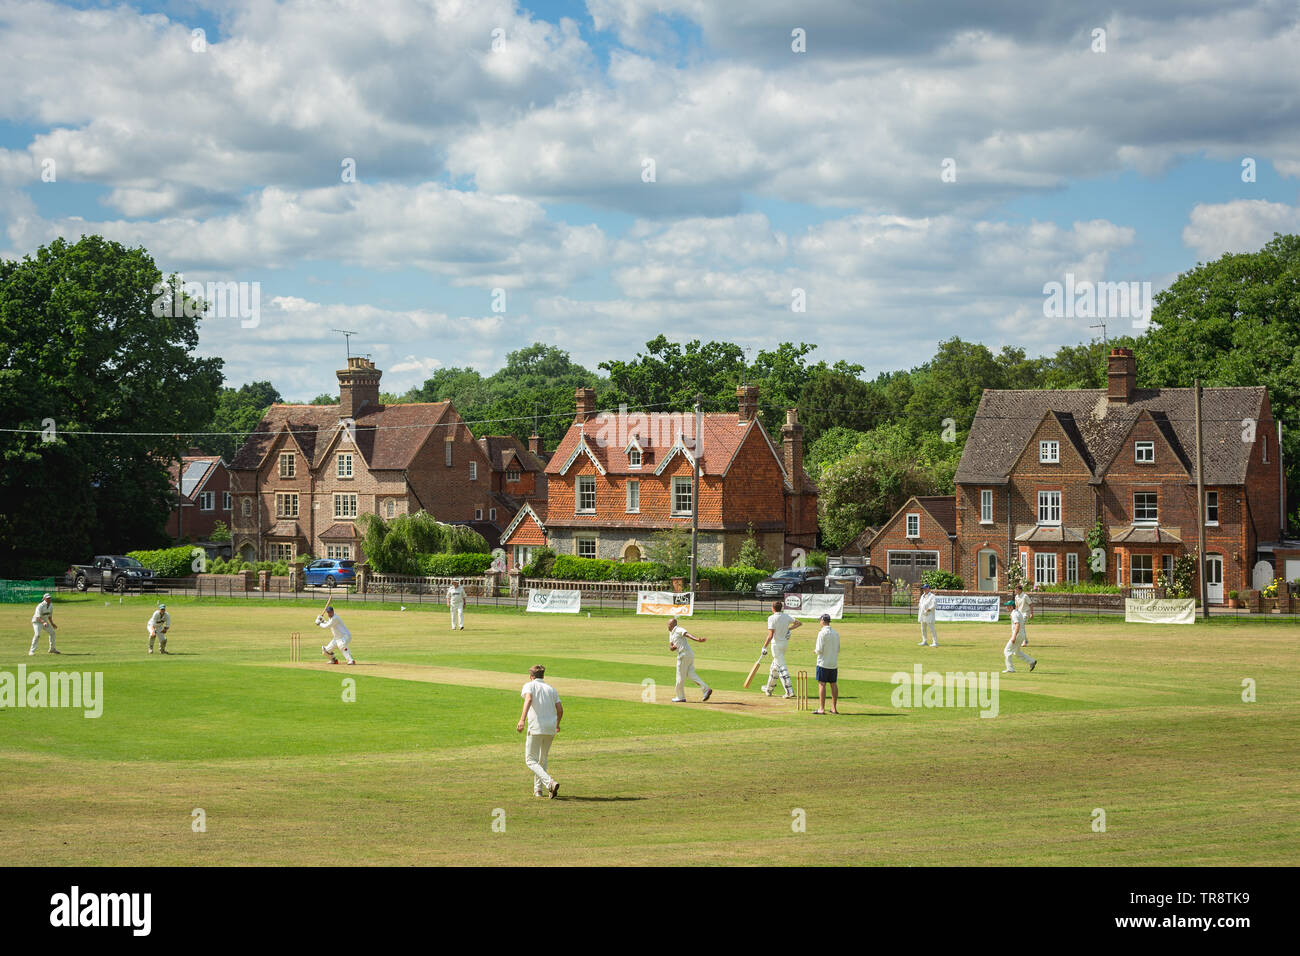 A typical English village cricket scene at Chiddingfold Cricket Club in Sussex, England - June 2018. Stock Photo